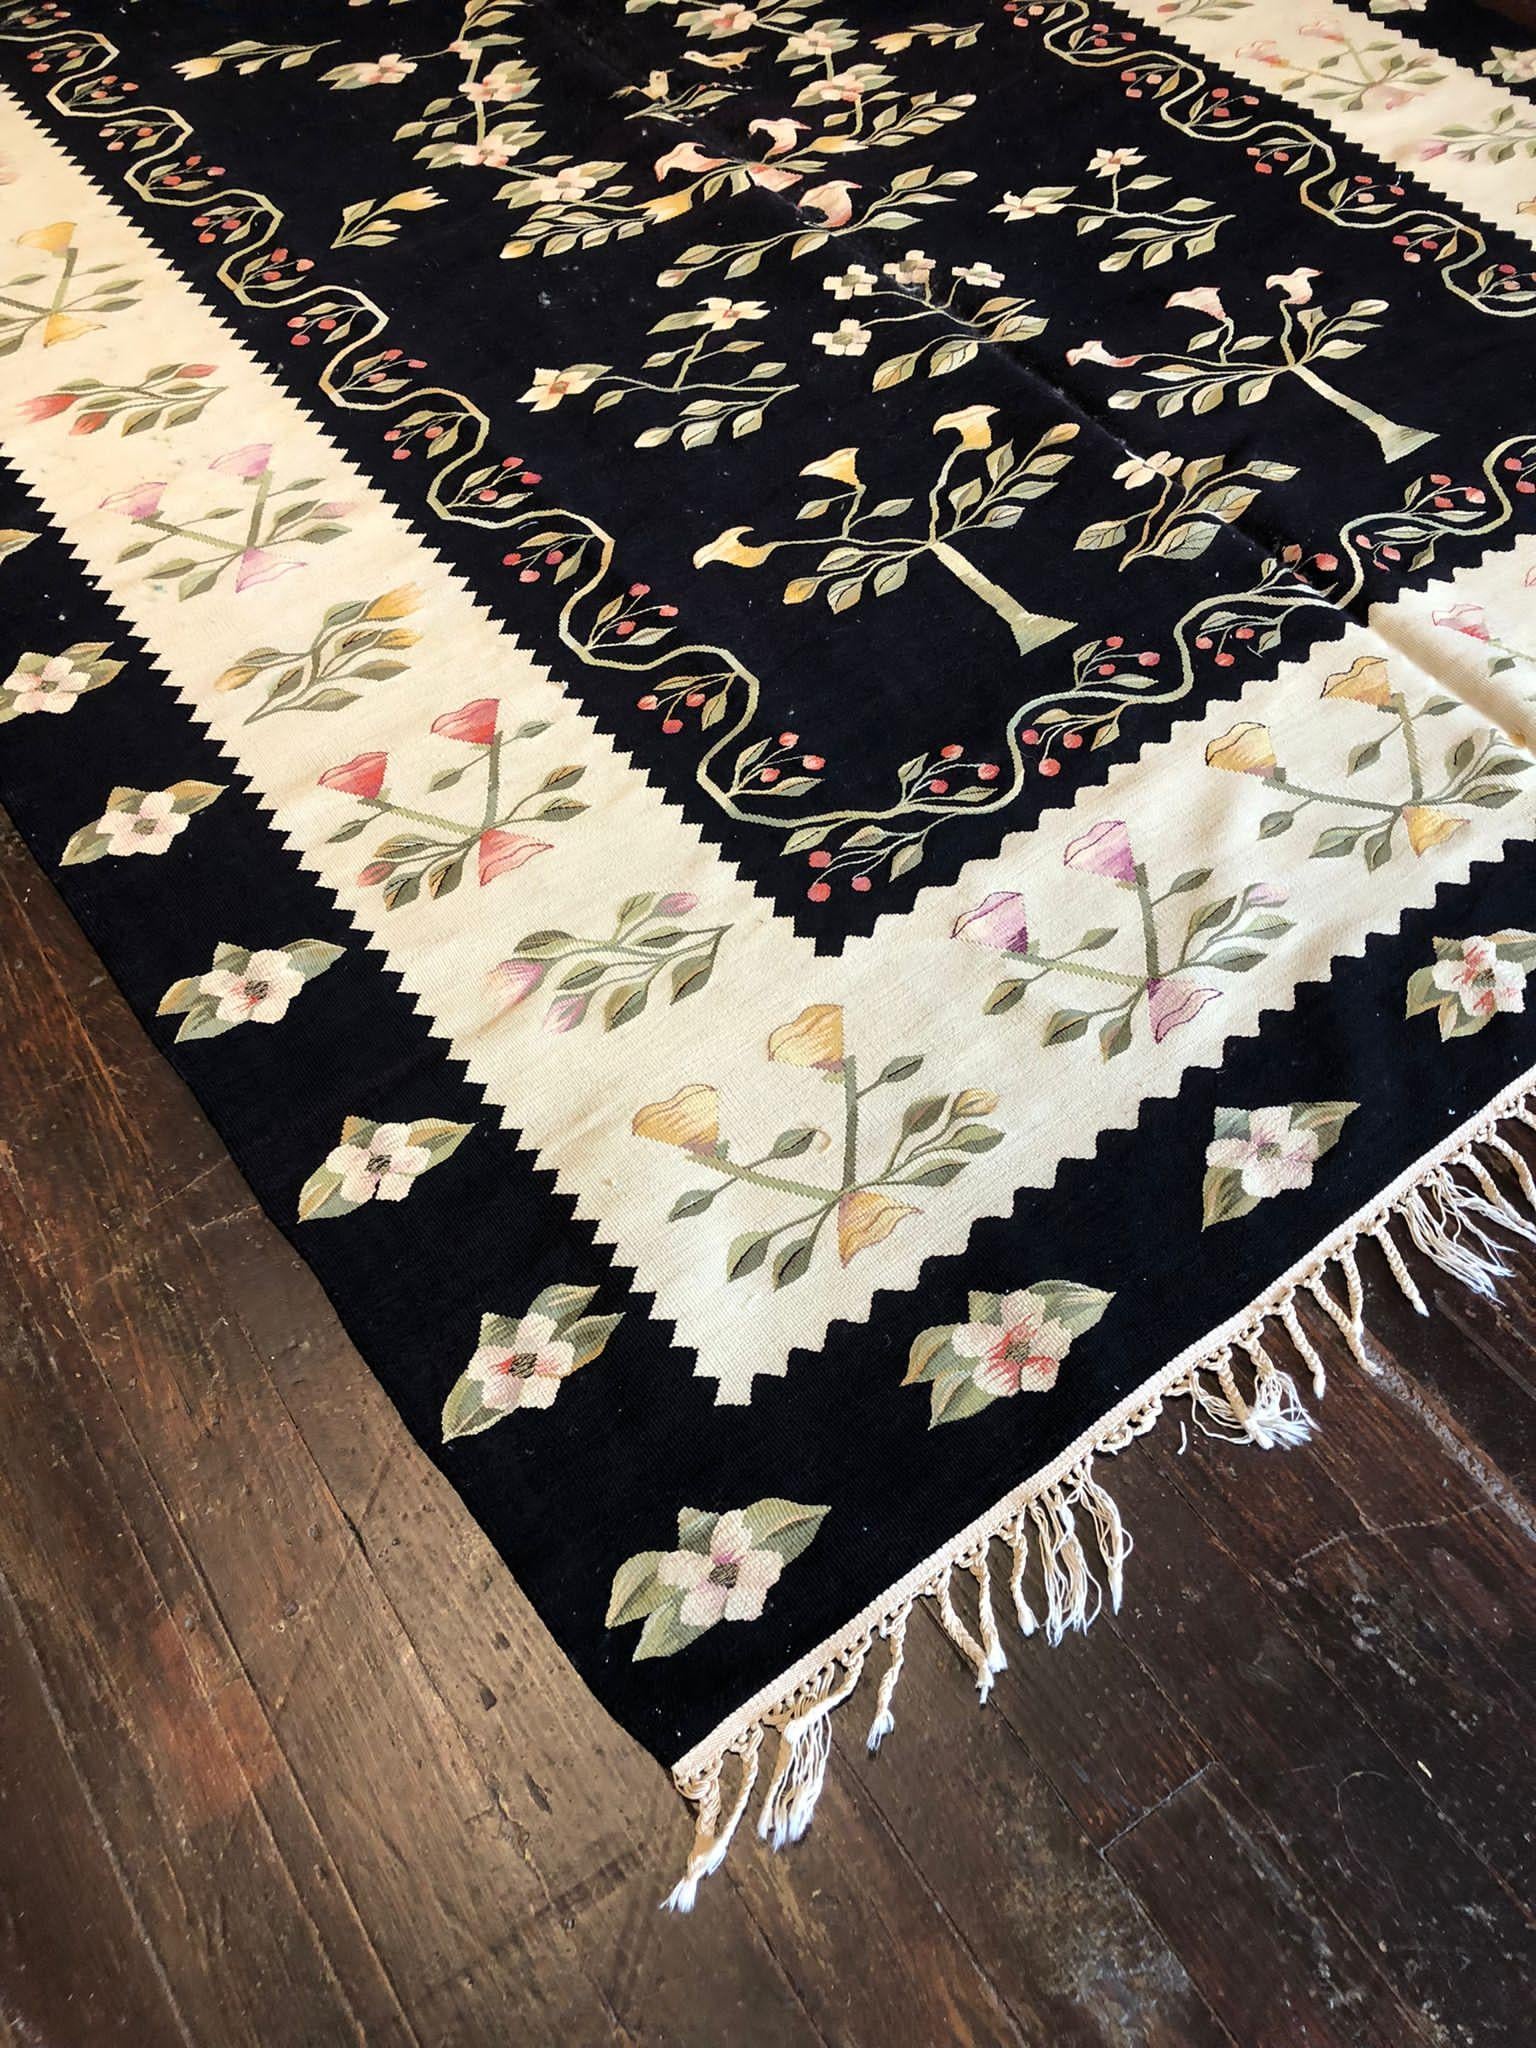  Vintage Kilim is a distinctive and charming type of flat-woven rug known for its geometric patterns and vibrant colors. This particular kilim, measuring 6 feet 8 inches by 10 feet, is a captivating piece of textile art that will add character and